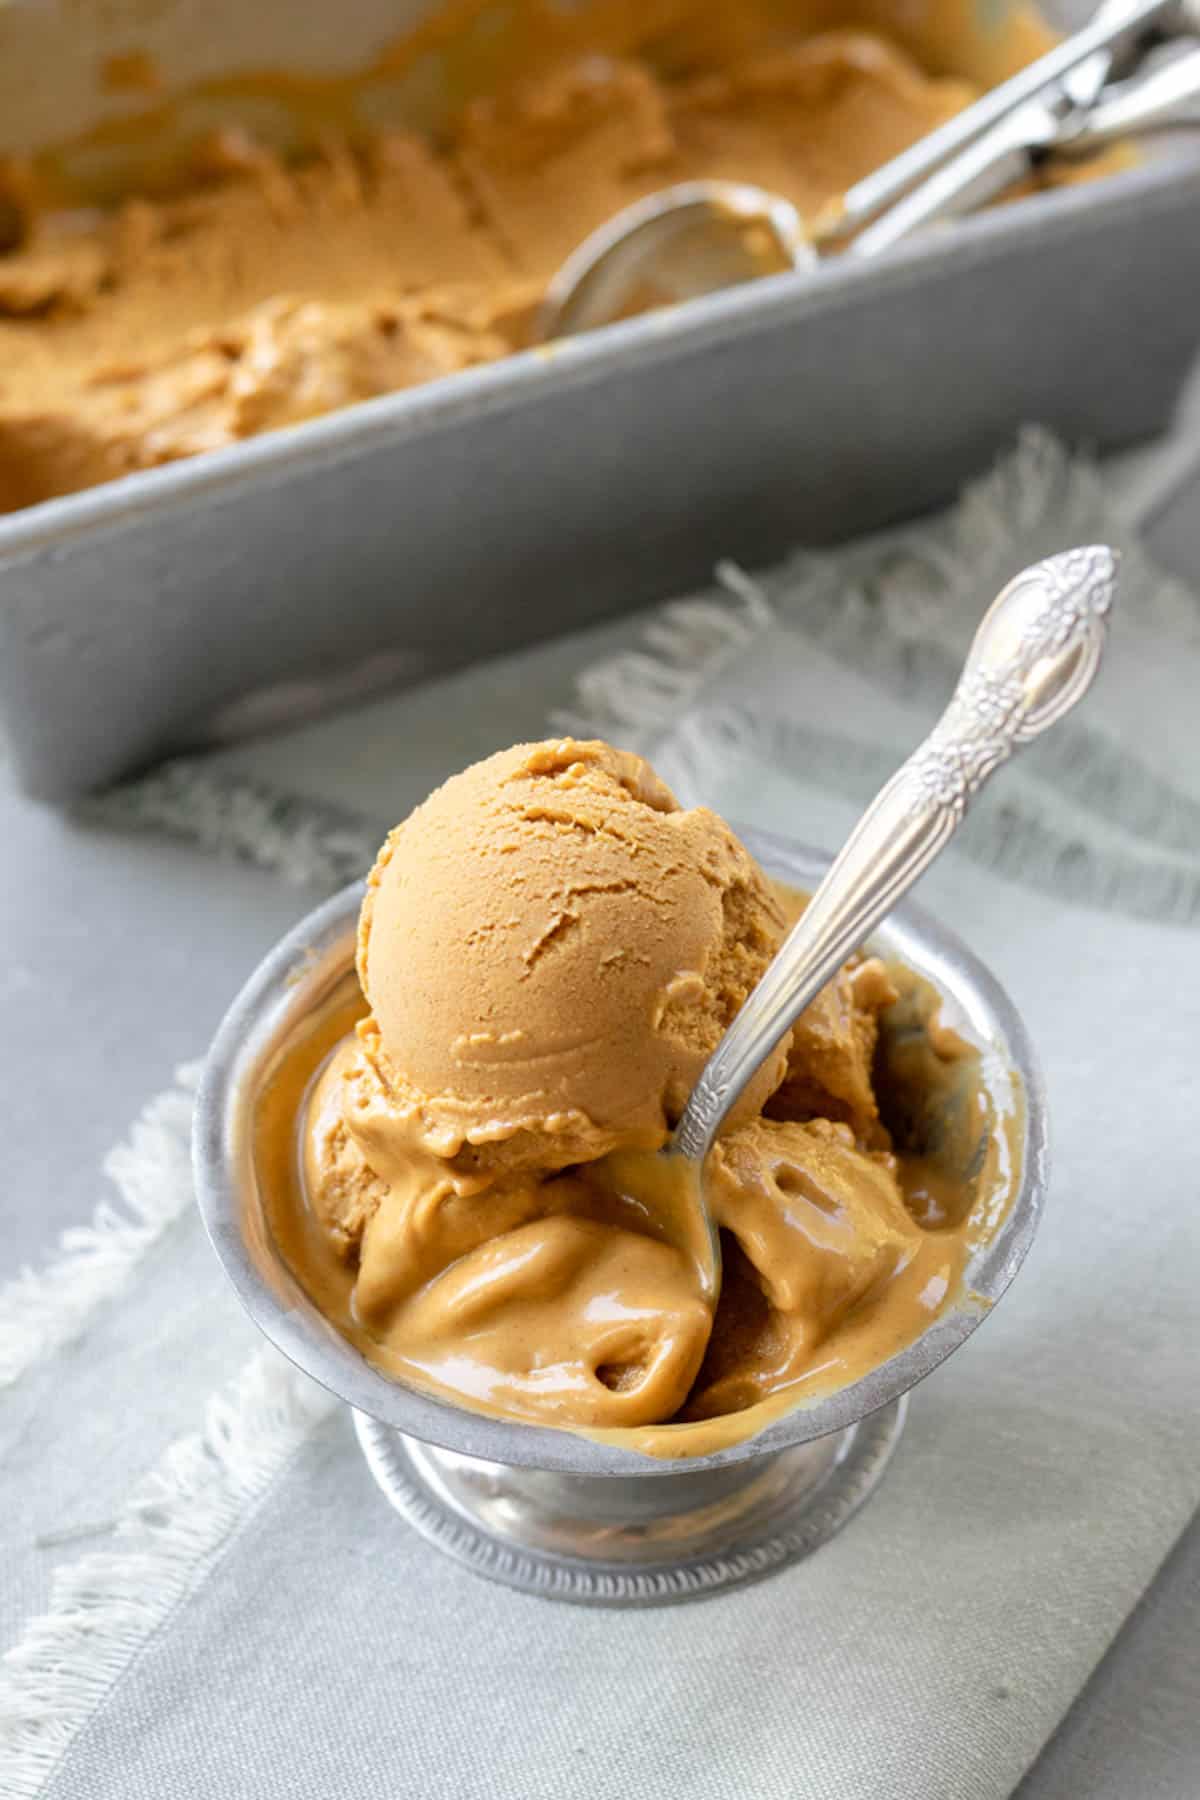 3 scoops of very creamy, melting pumpkin ice cream in a silver dish.